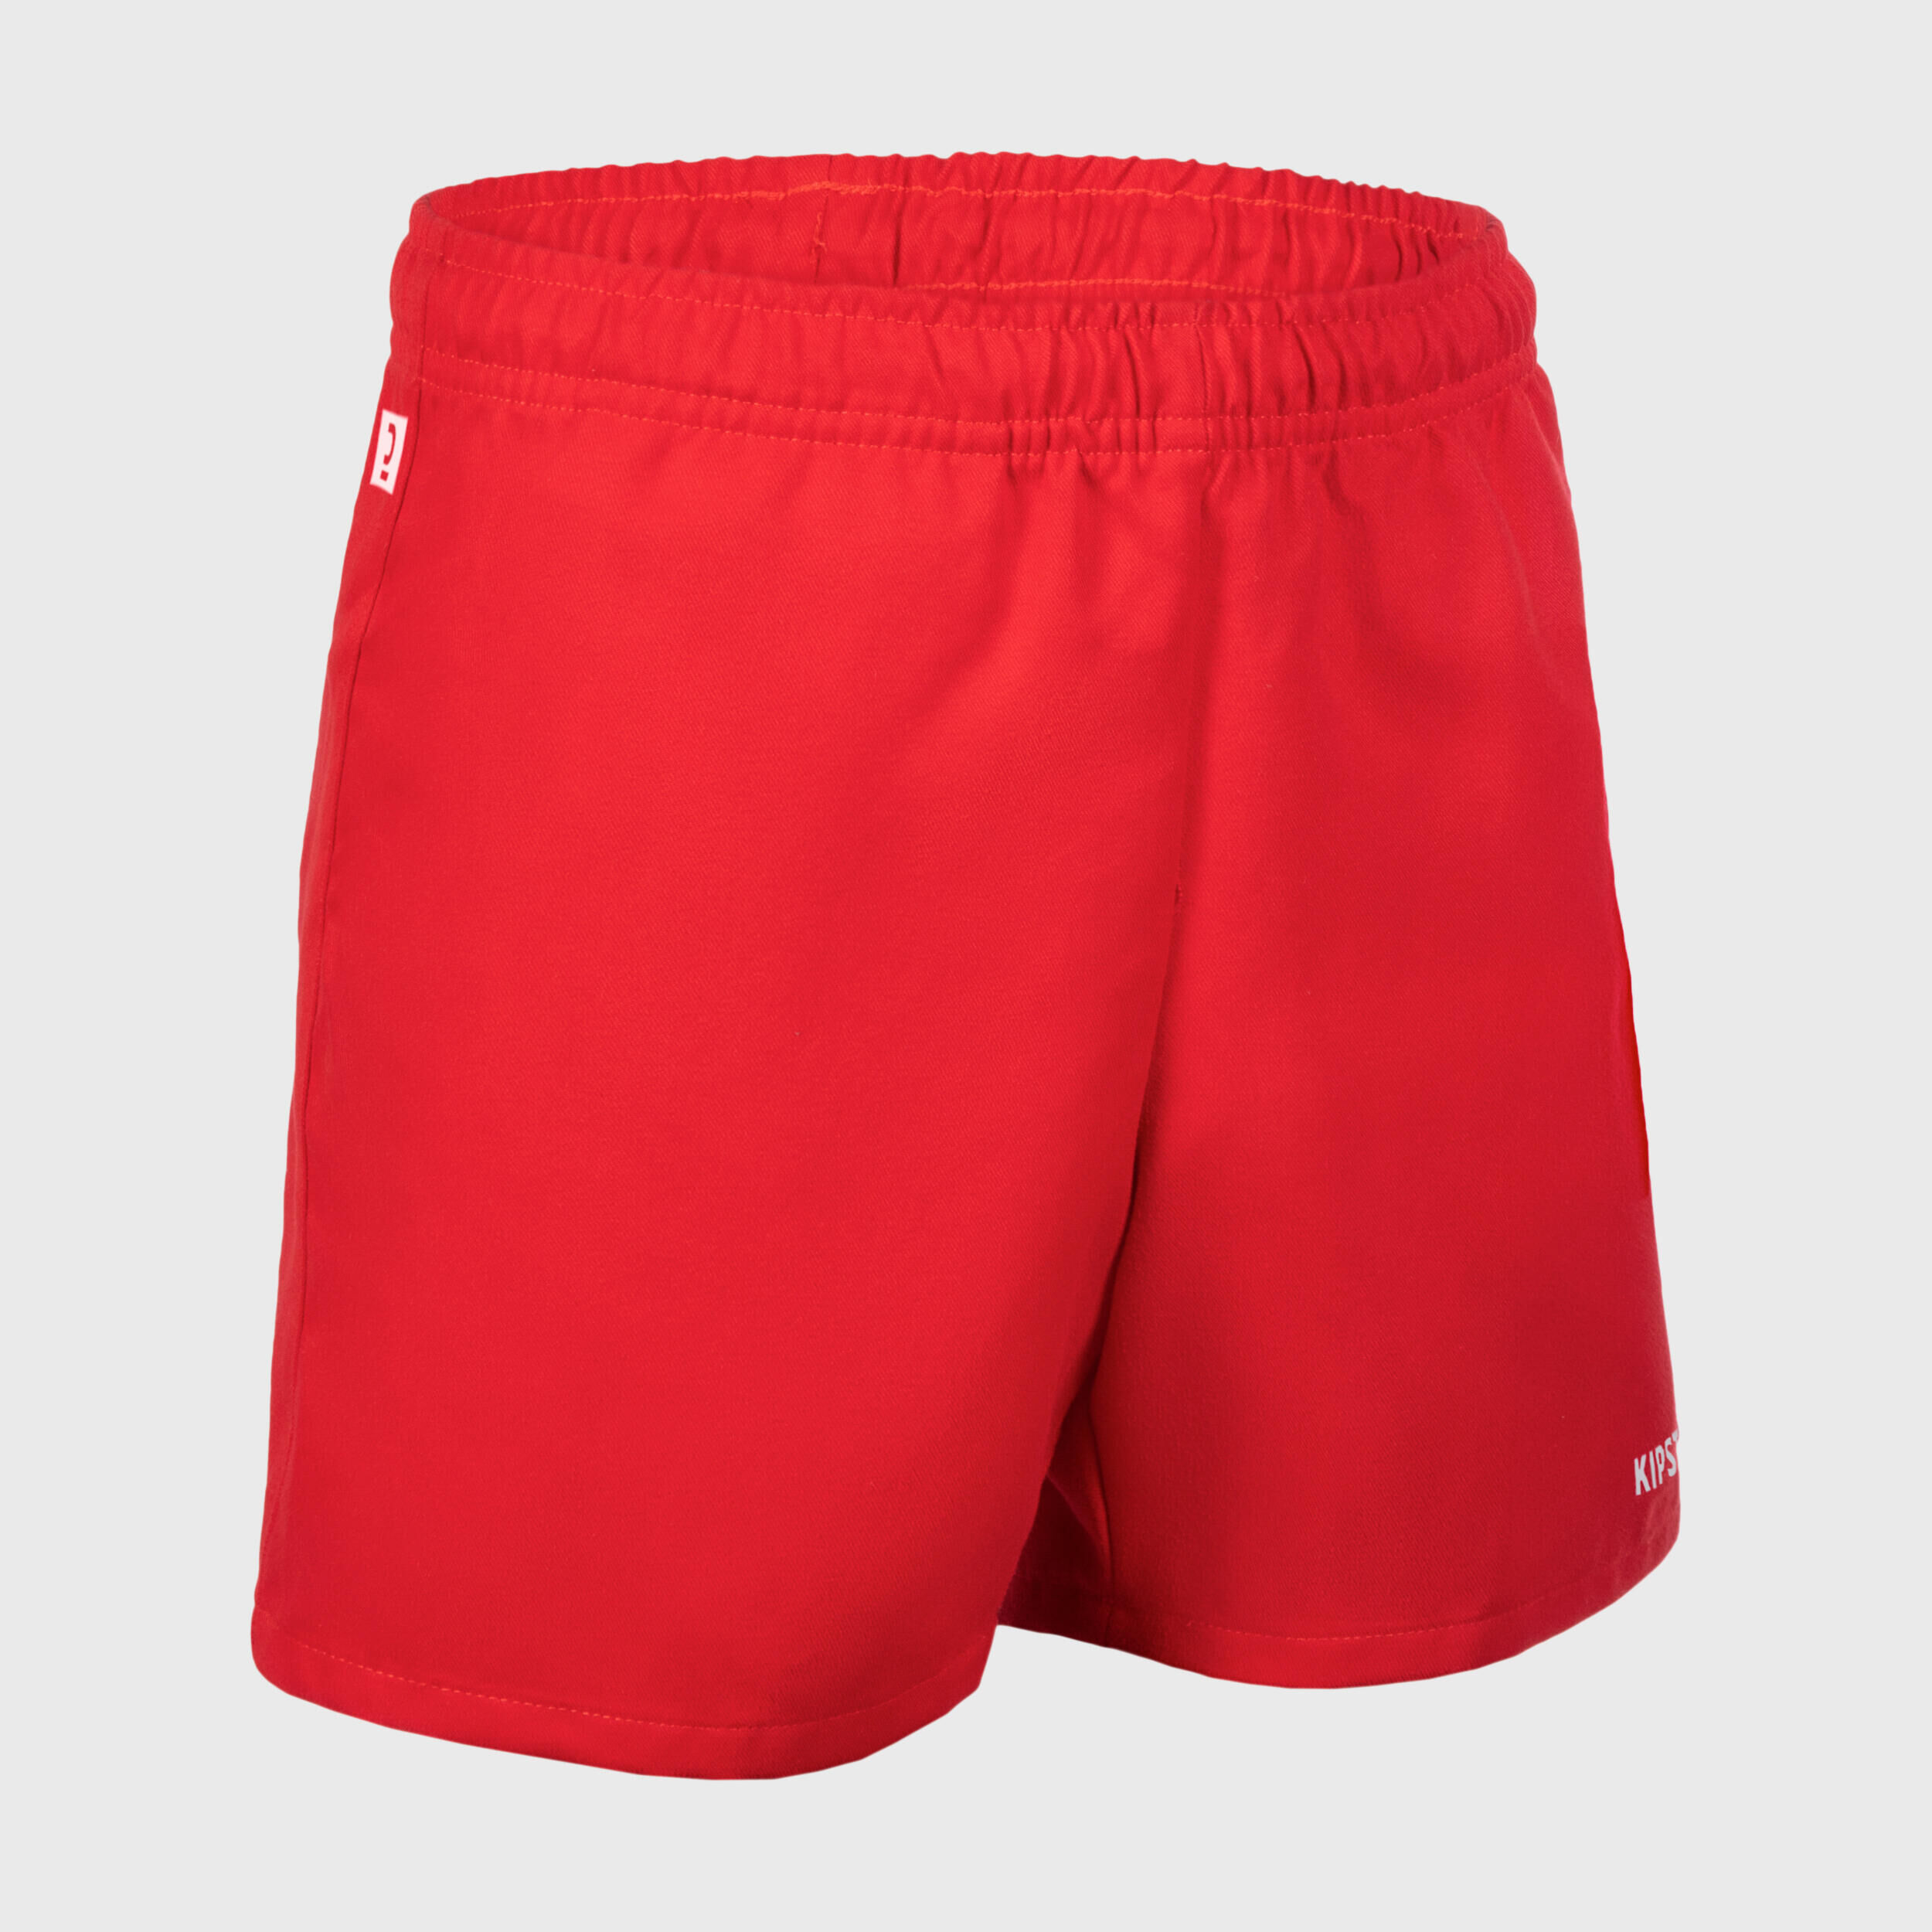 OFFLOAD Adult Rugby Shorts with Pockets R100 - Red